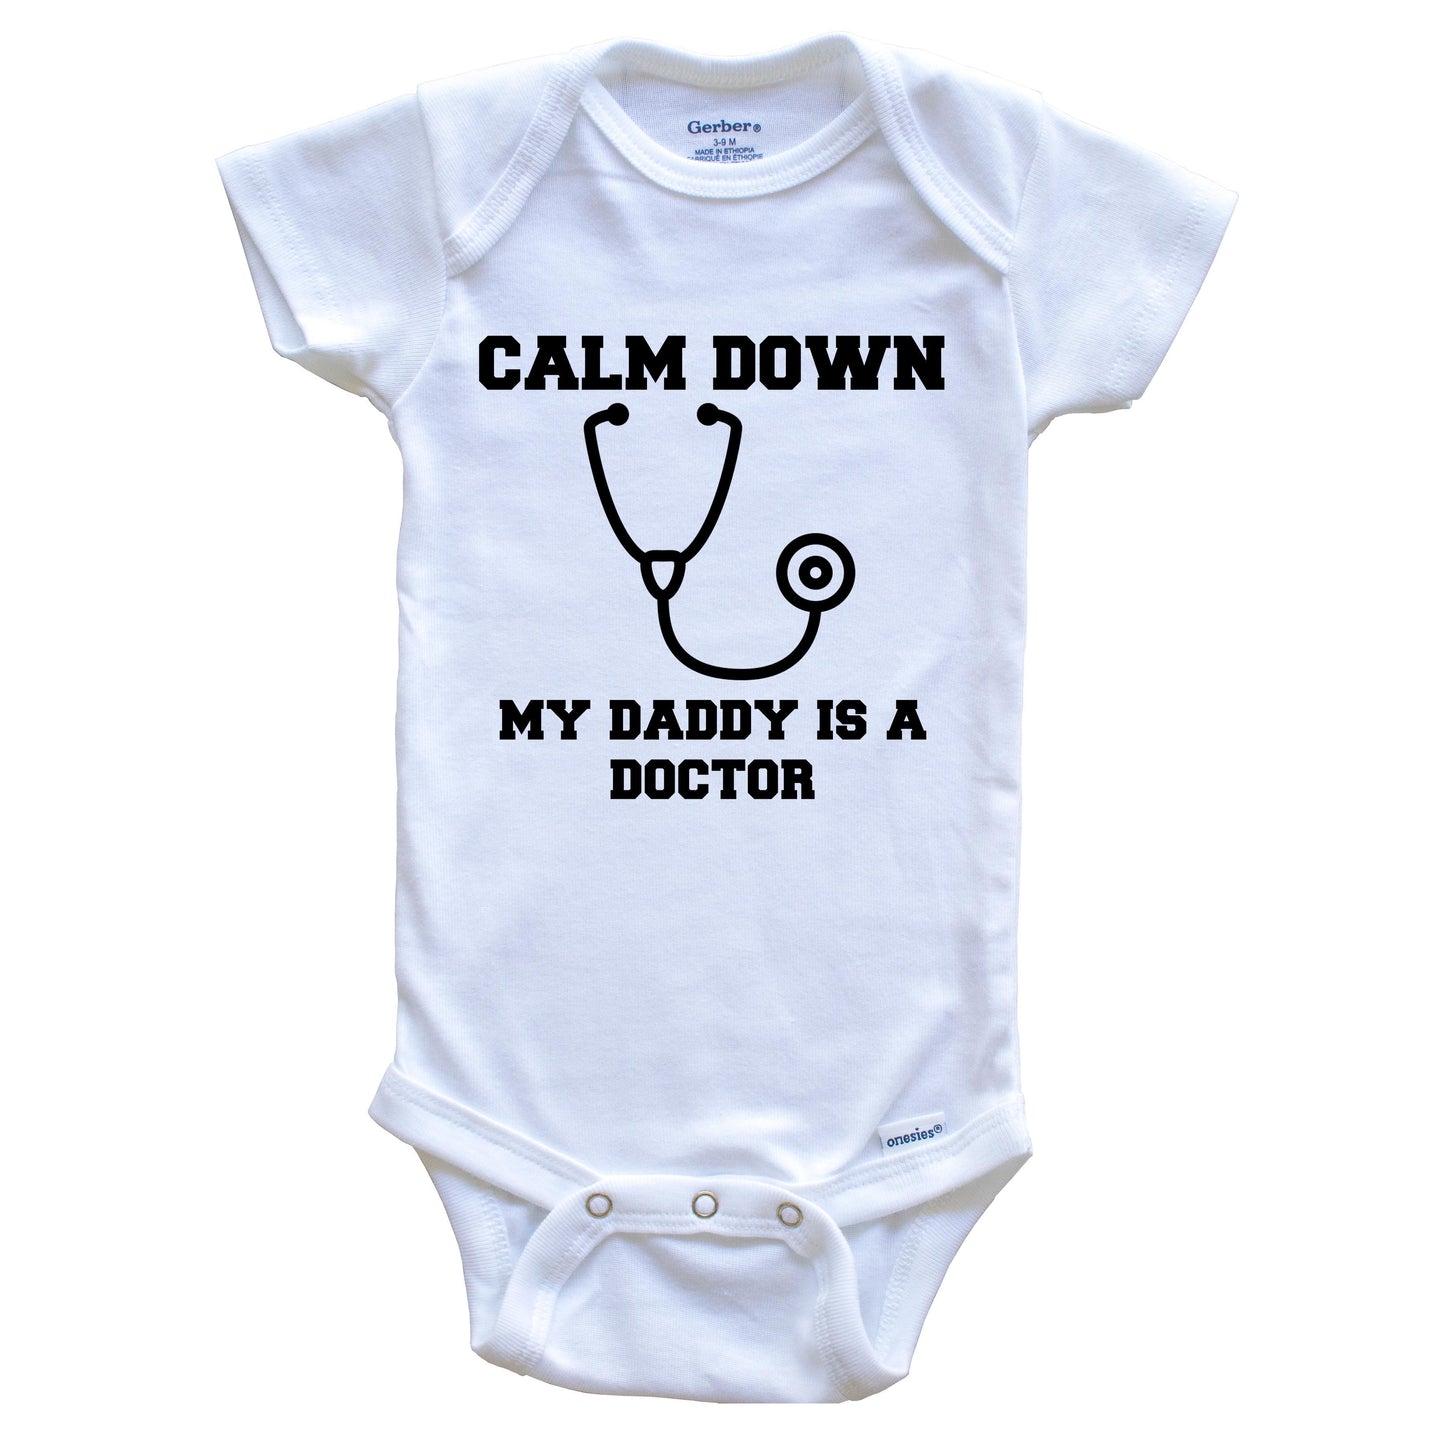 Calm Down My Daddy Is A Doctor Funny Baby Onesie - One Piece Baby Bodysuit